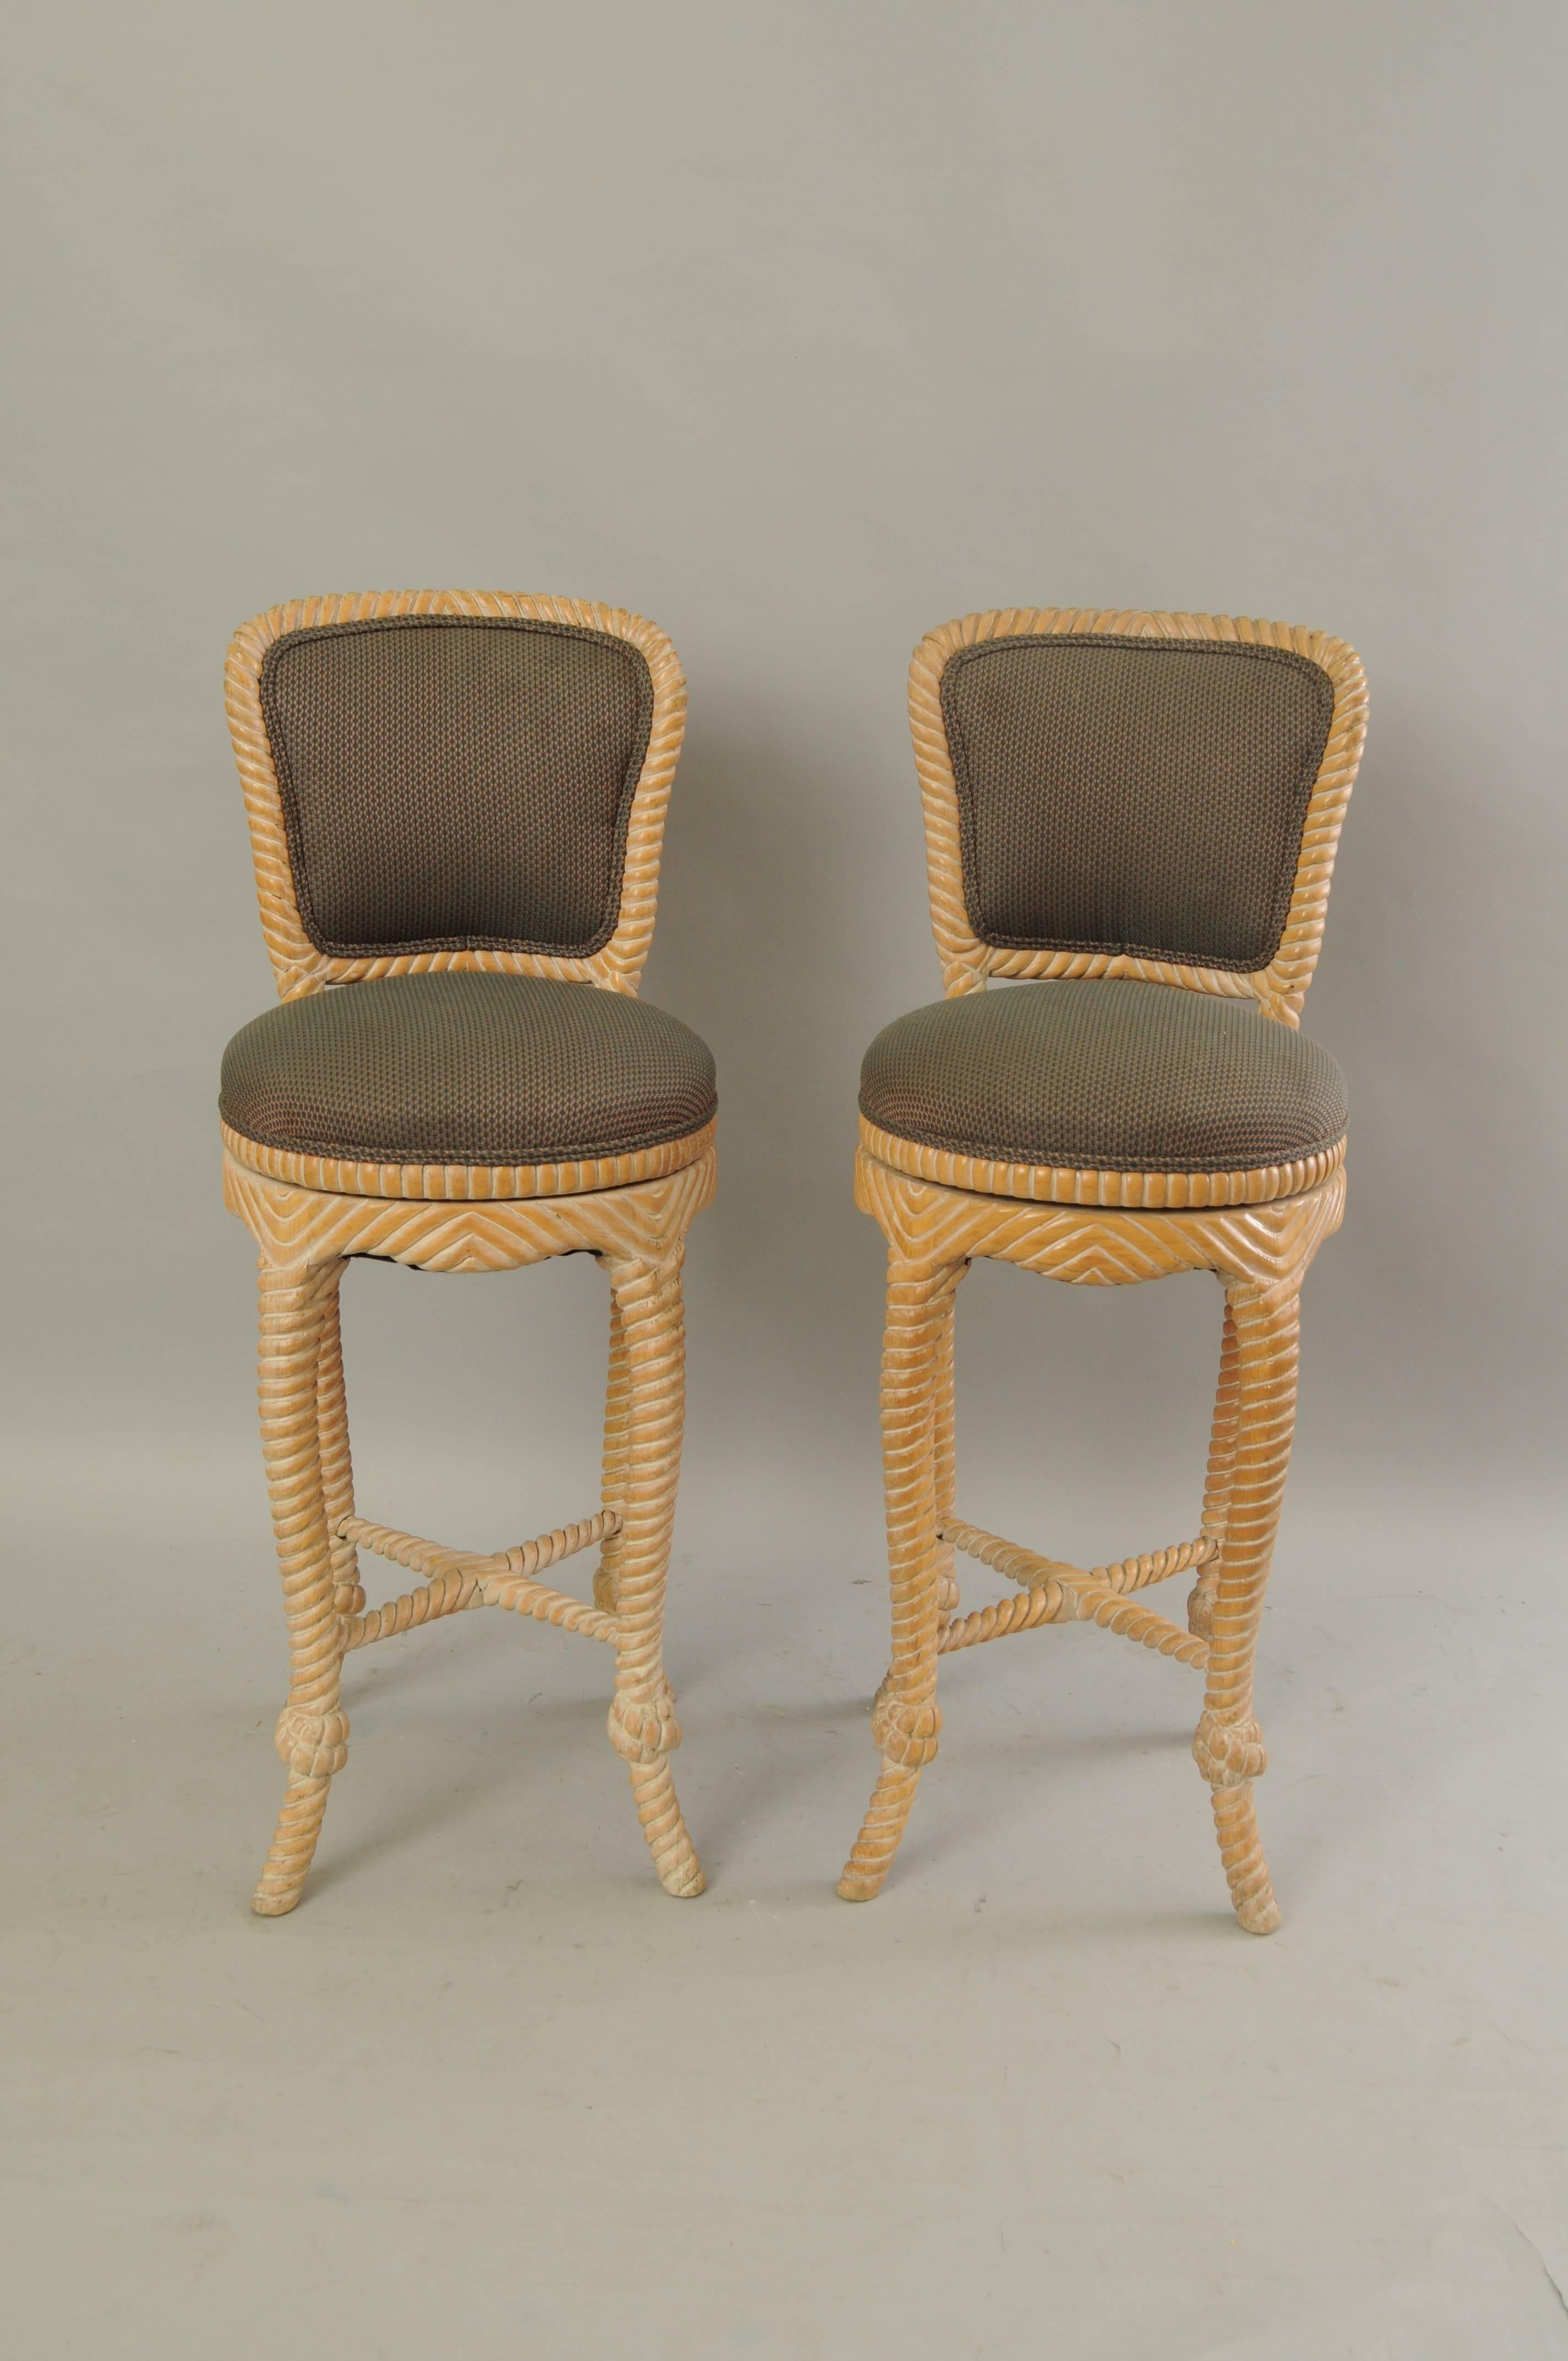 Pair of vintage Italian Hollywood Regency carved wood rope and tassel swivel barstools. Item features solid carved wood frames, upholstered backs, swivel seats, rope and knot carved design, great Italian Hollywood Regency form. Great for Mid-Century